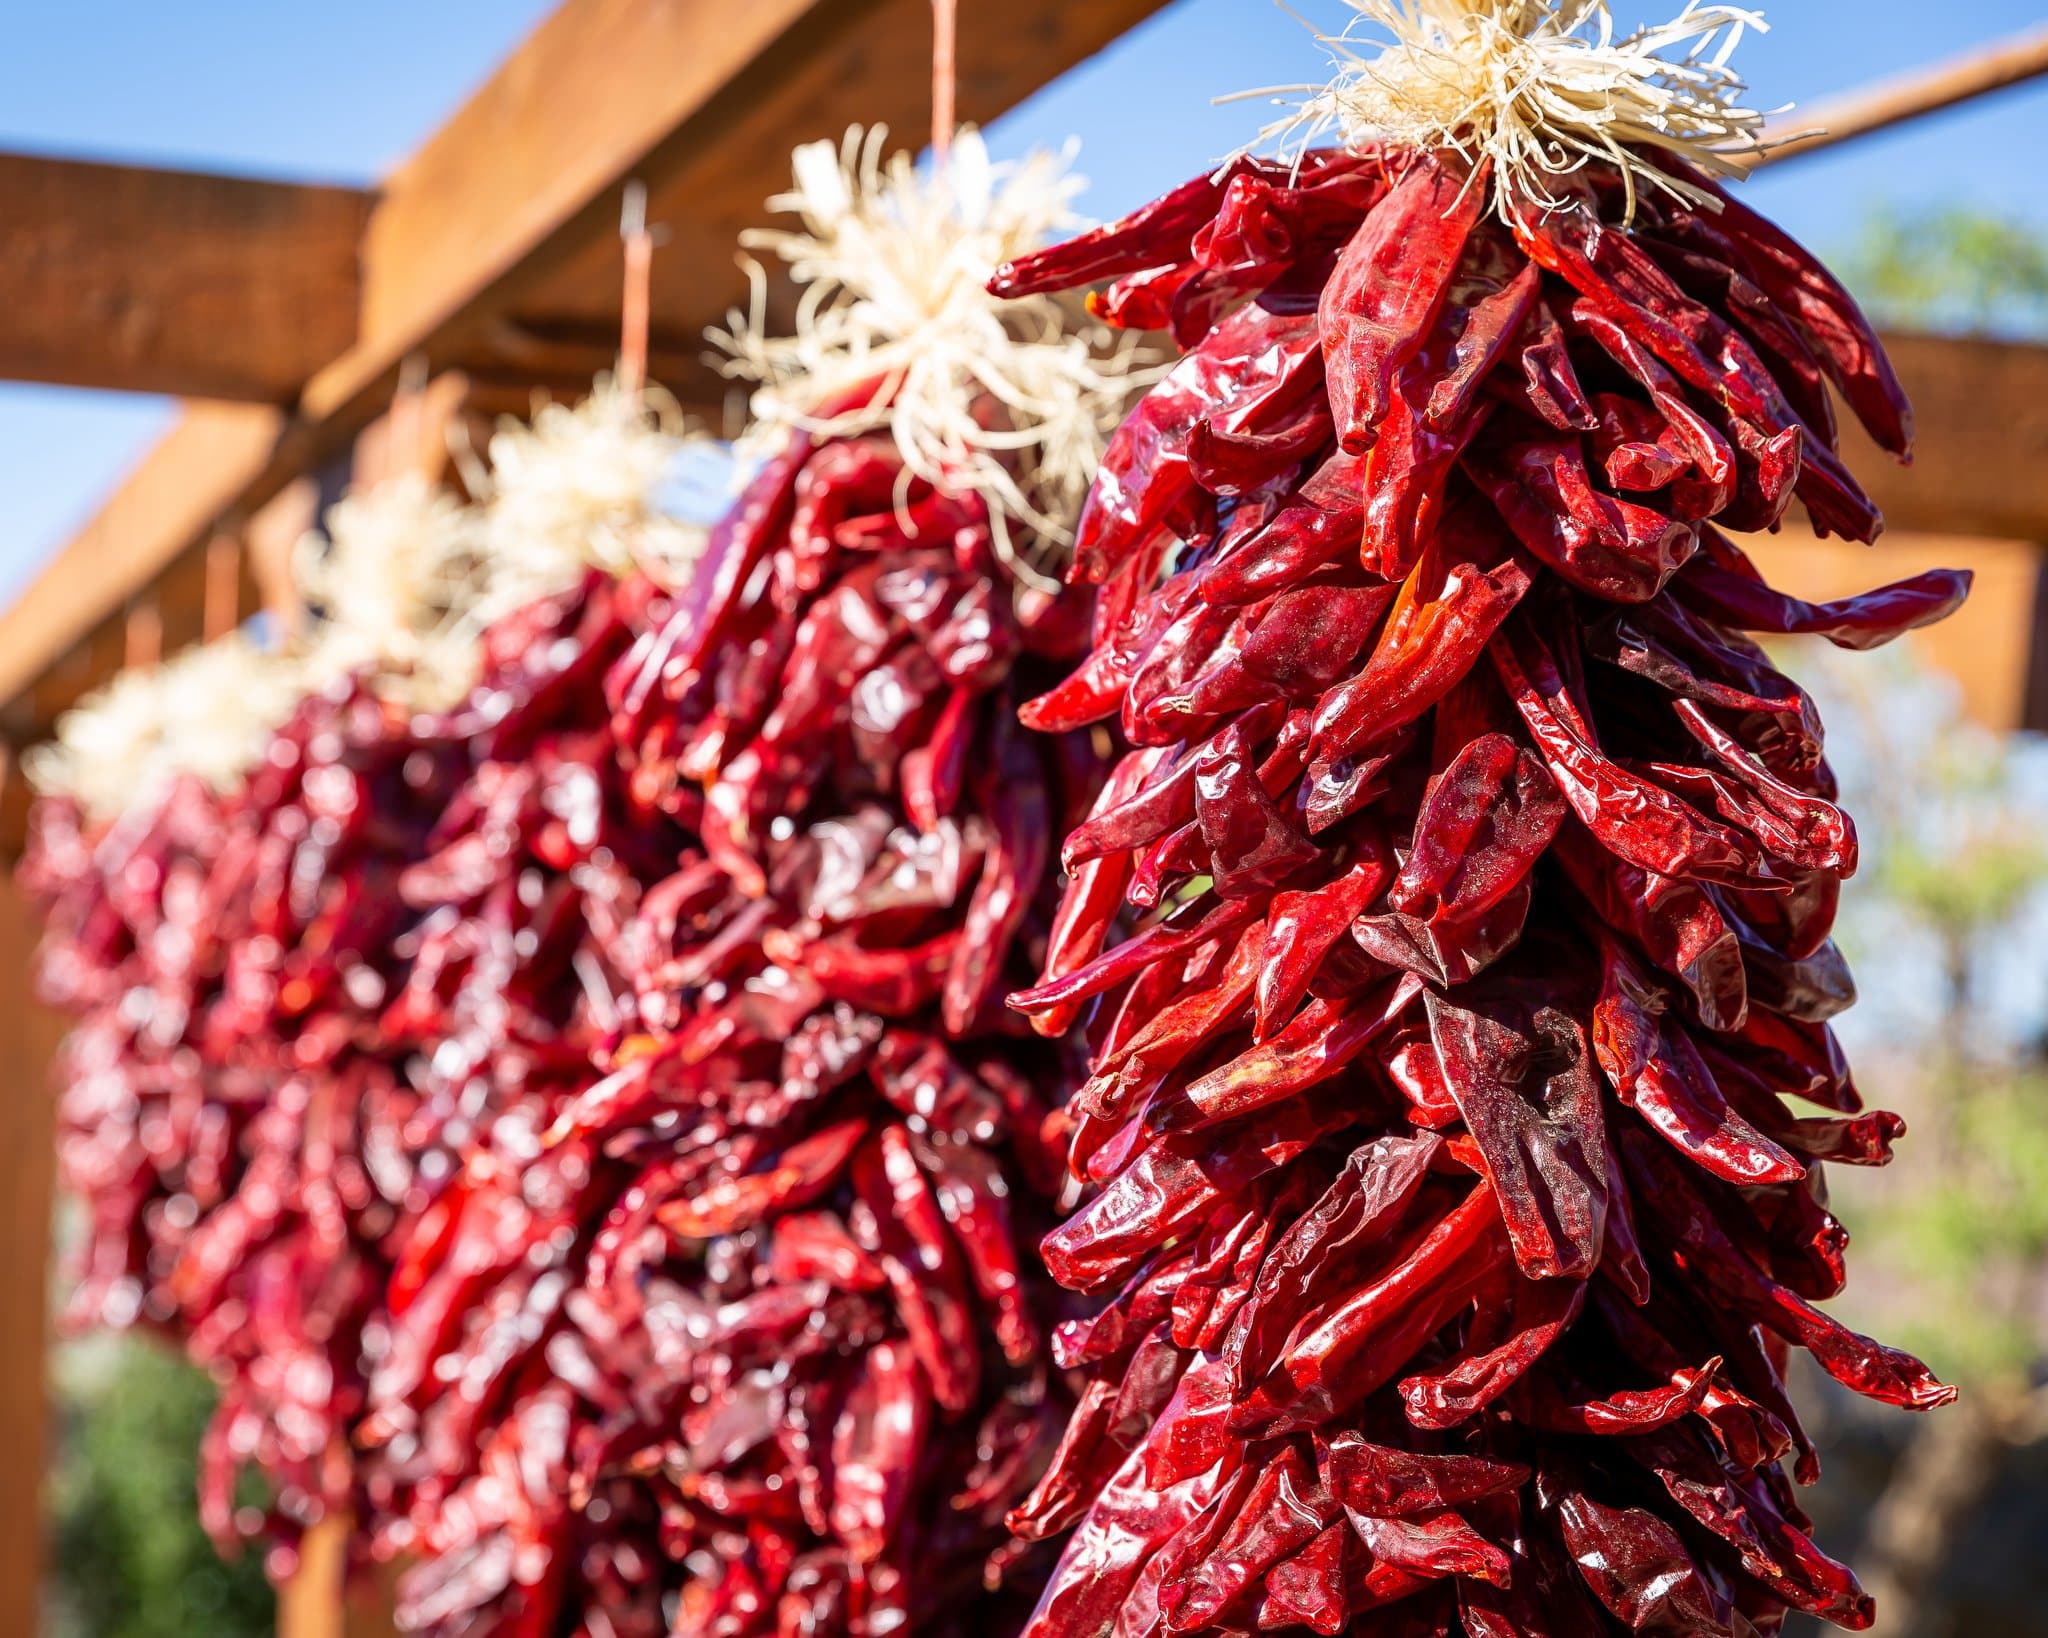 Several bunches of Traditional Sandia Ristras hang to dry in the sunlight, strung together by their stems and displayed outdoors against a blurred background.